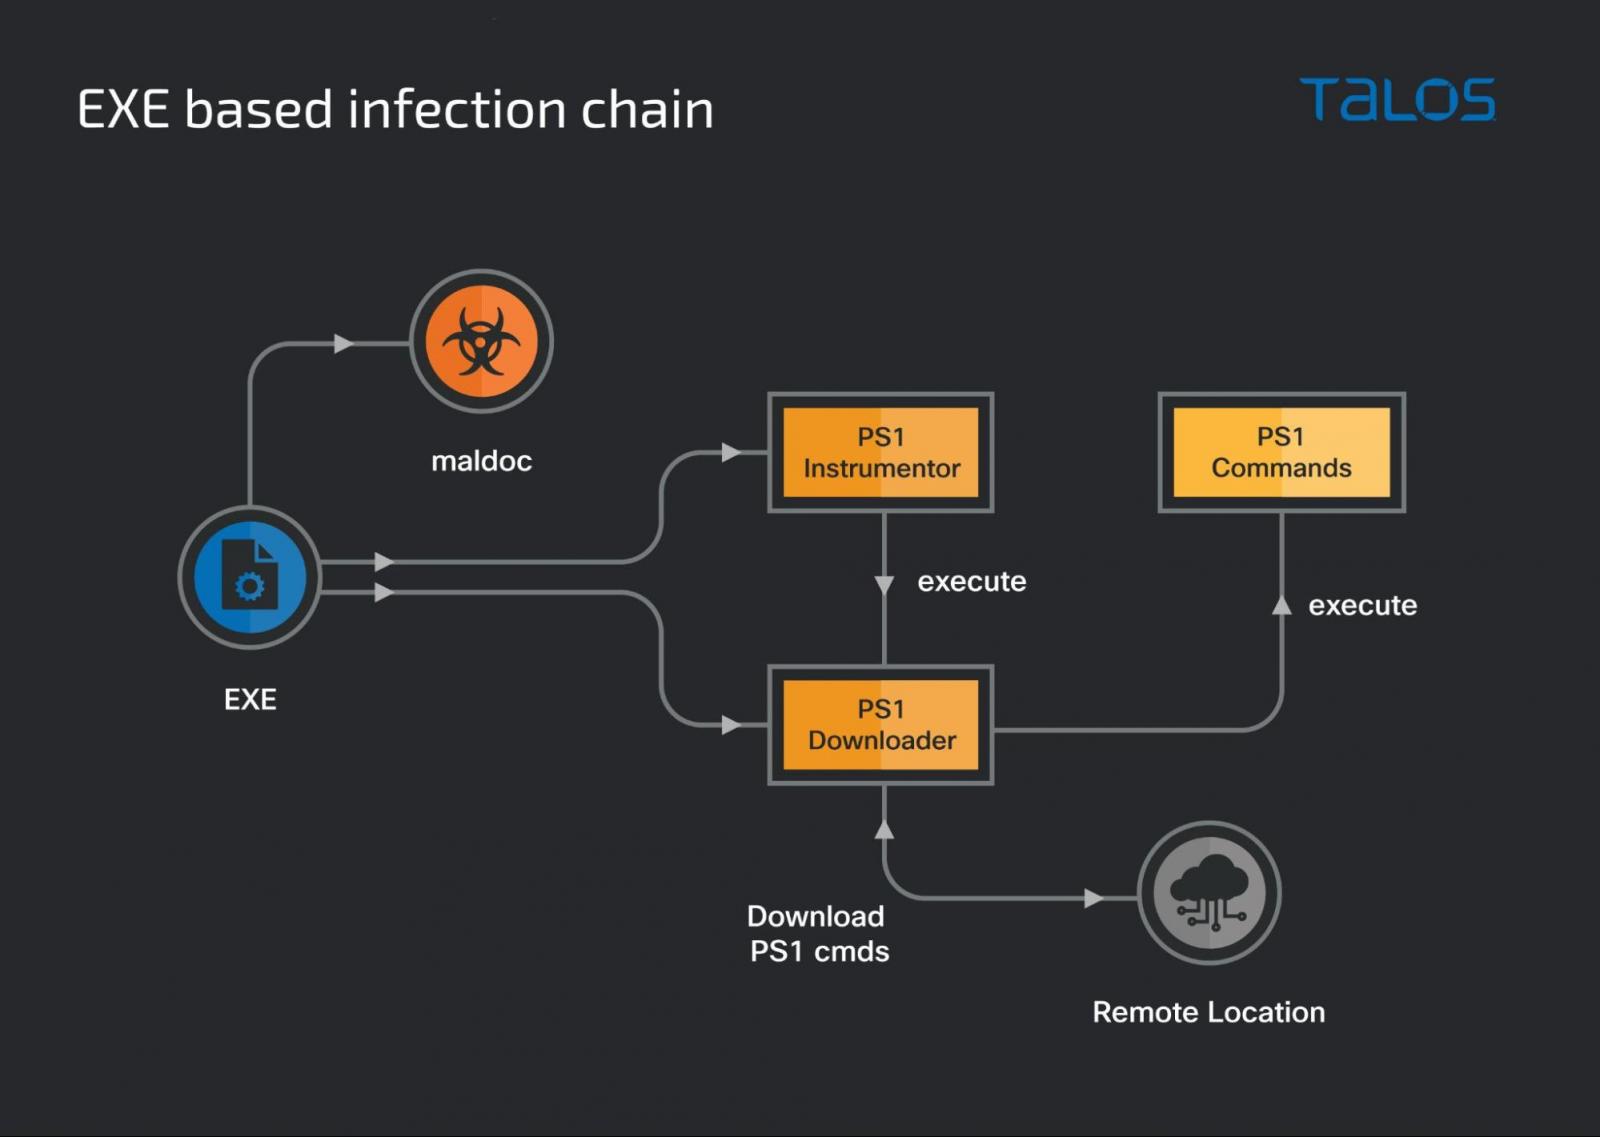 Second infection chain diagram